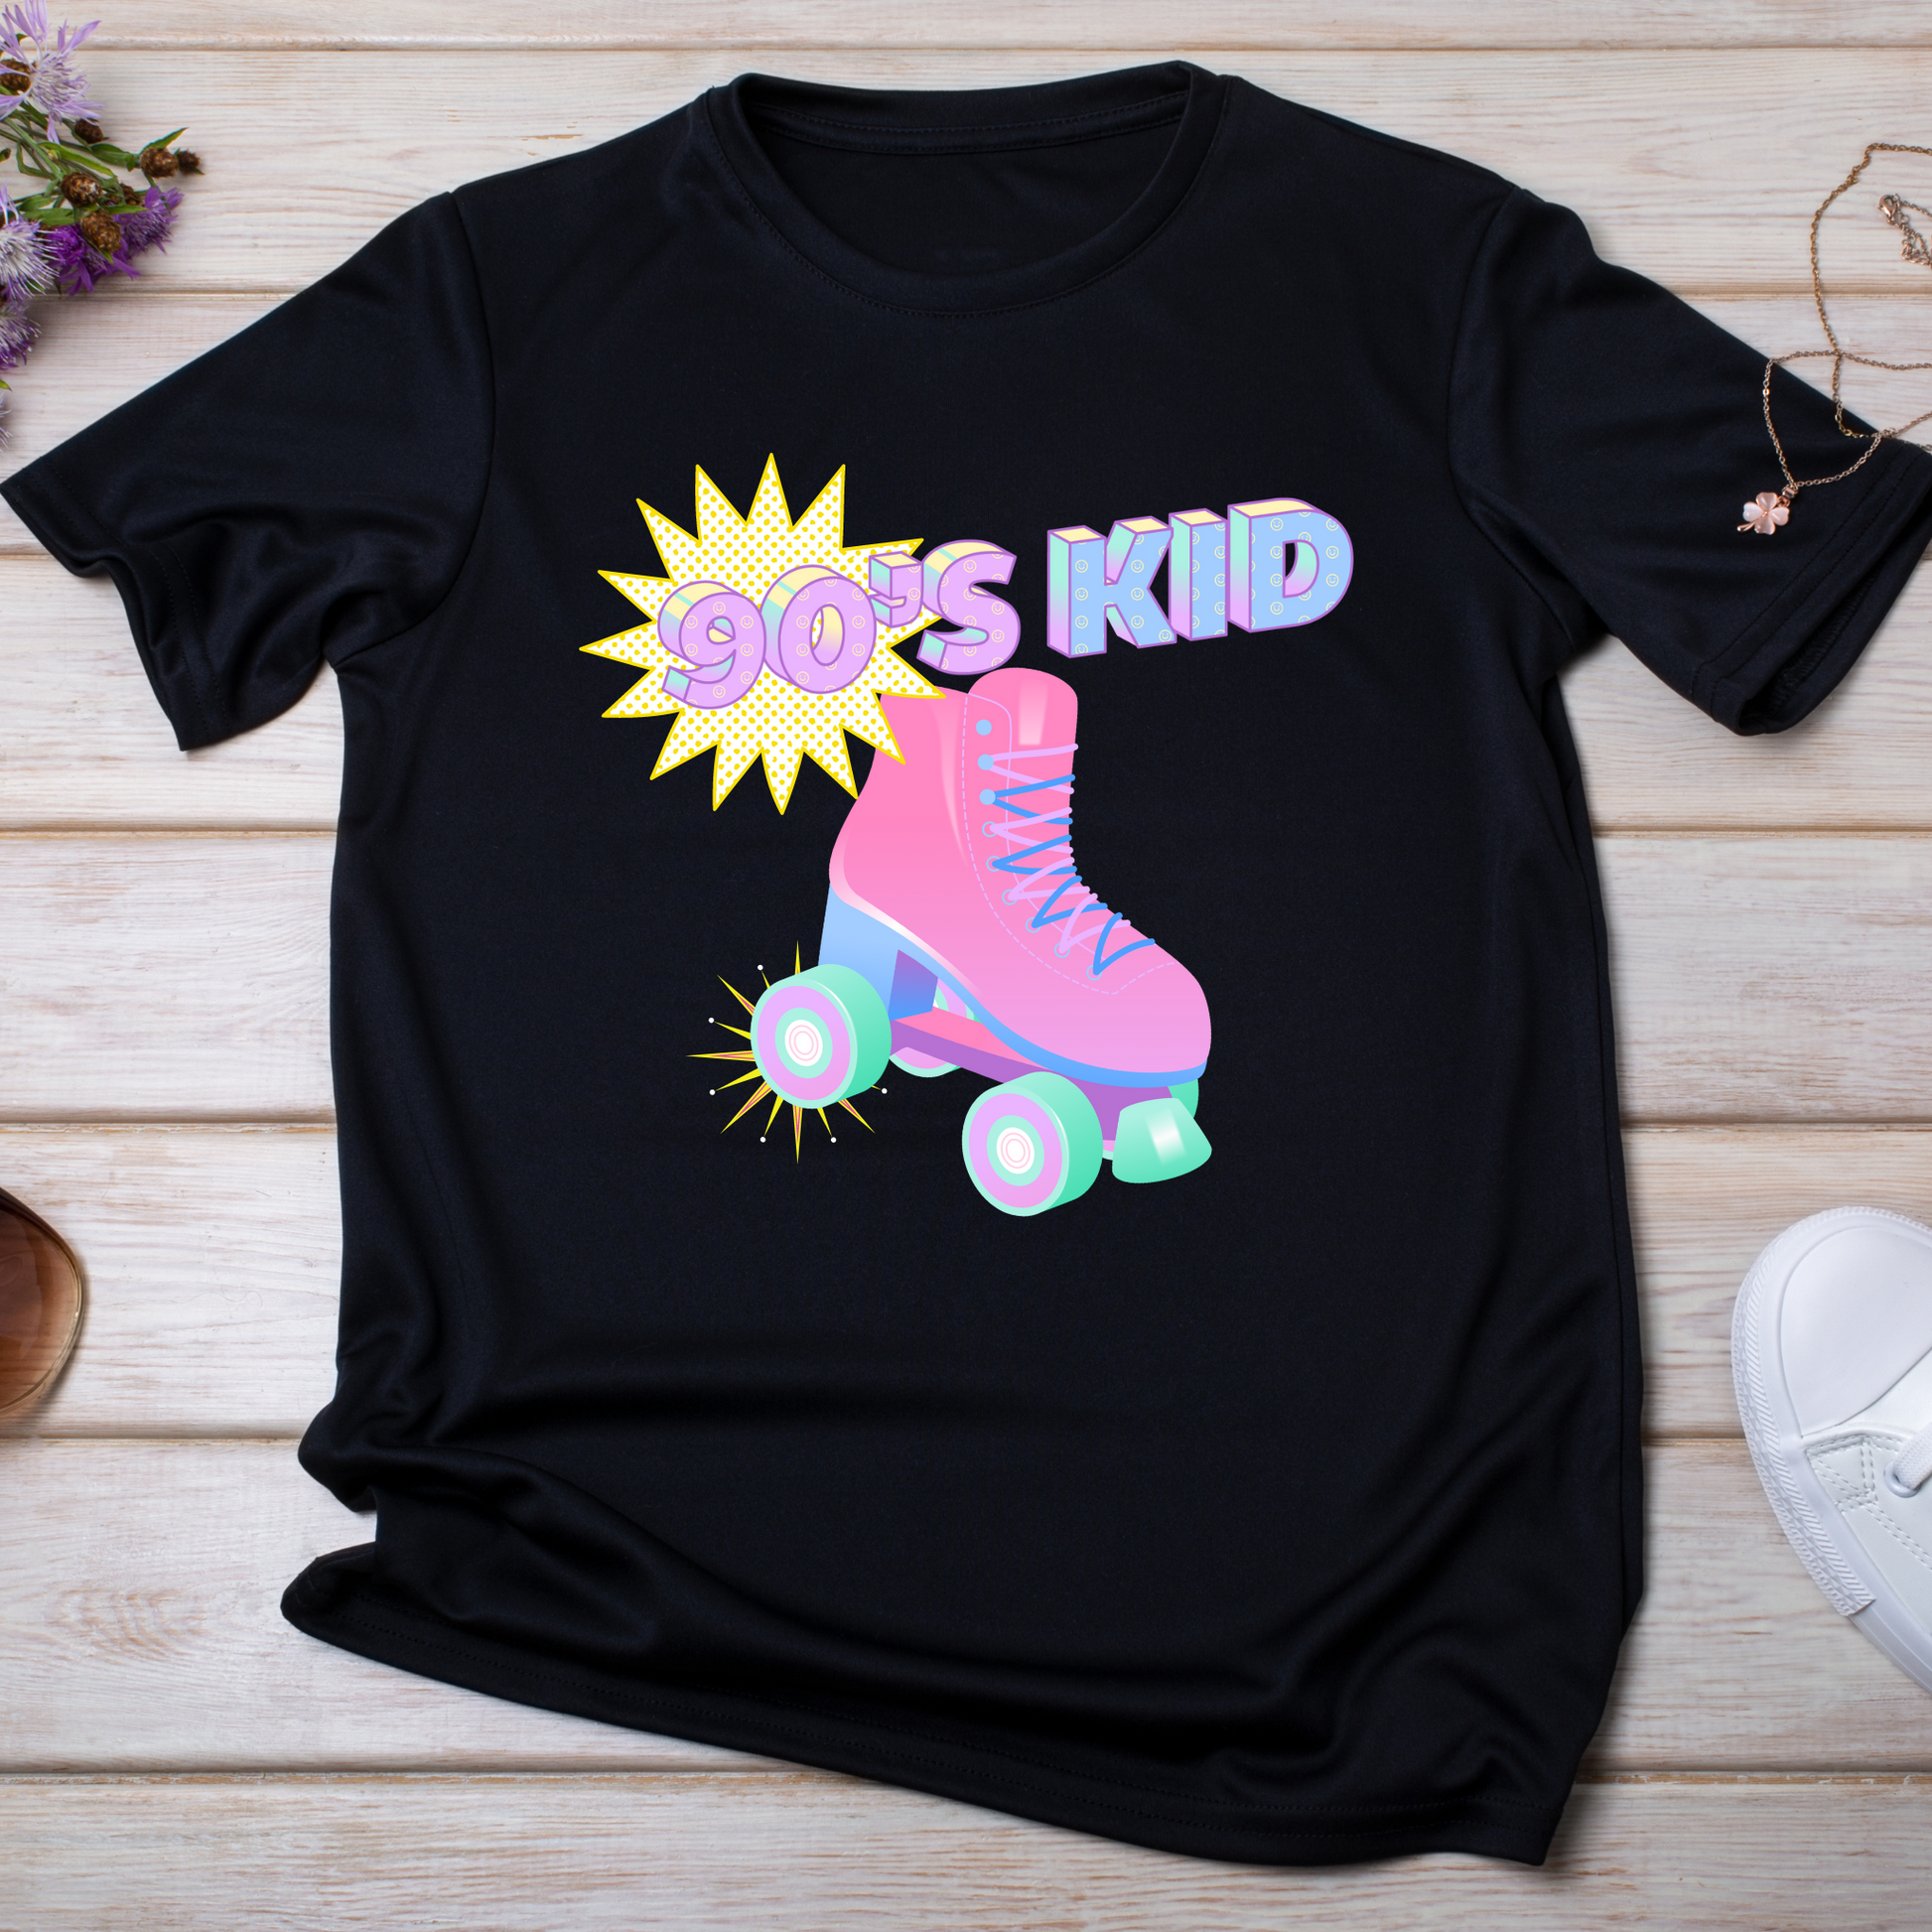 90s kid awesome ladies tee - cool vintage t shirt - Premium t-shirt from Lees Krazy Teez - Just $19.95! Shop now at Lees Krazy Teez